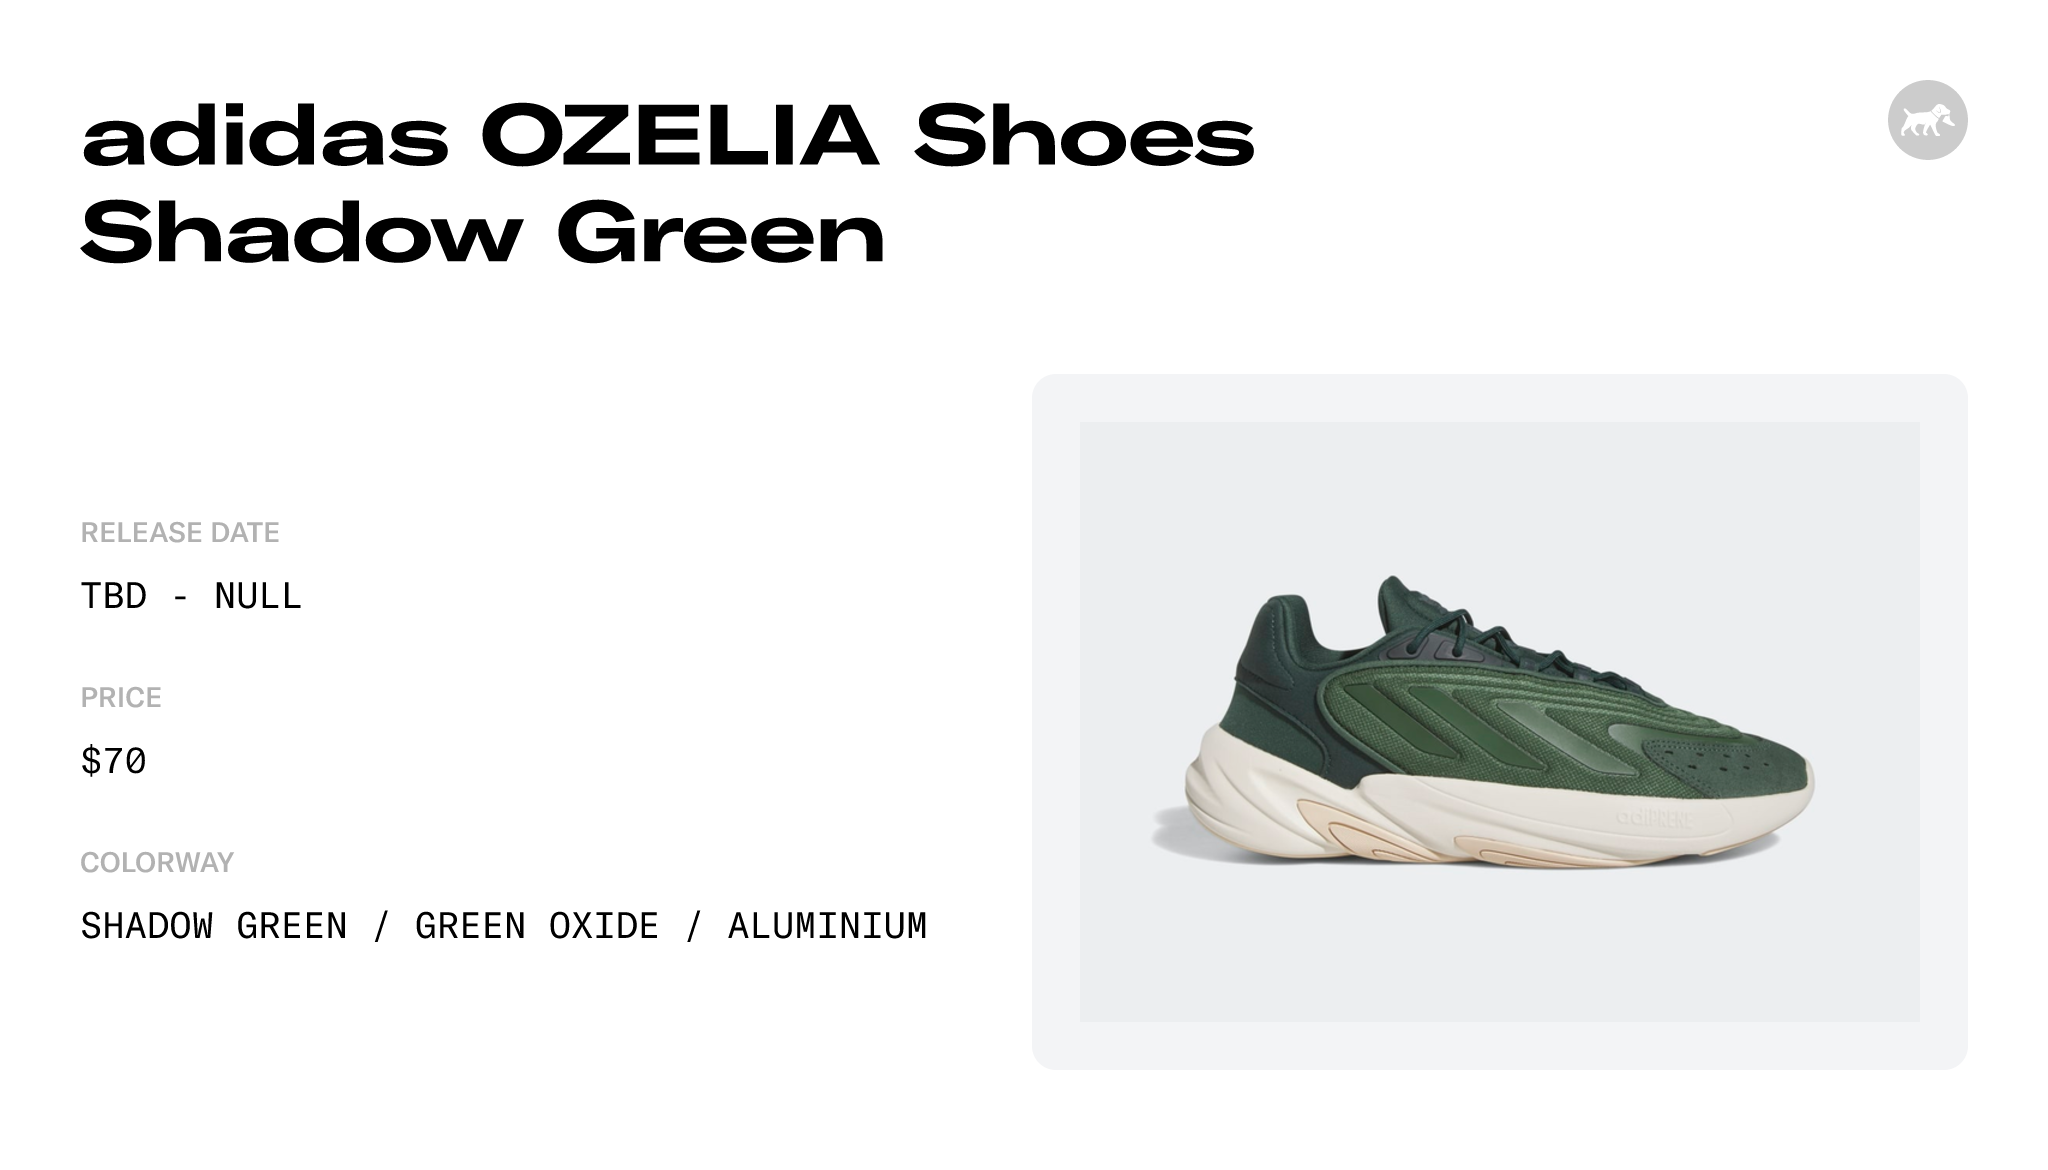 adidas OZELIA Shoes Shadow Green - GY2503 Raffles and Release Date